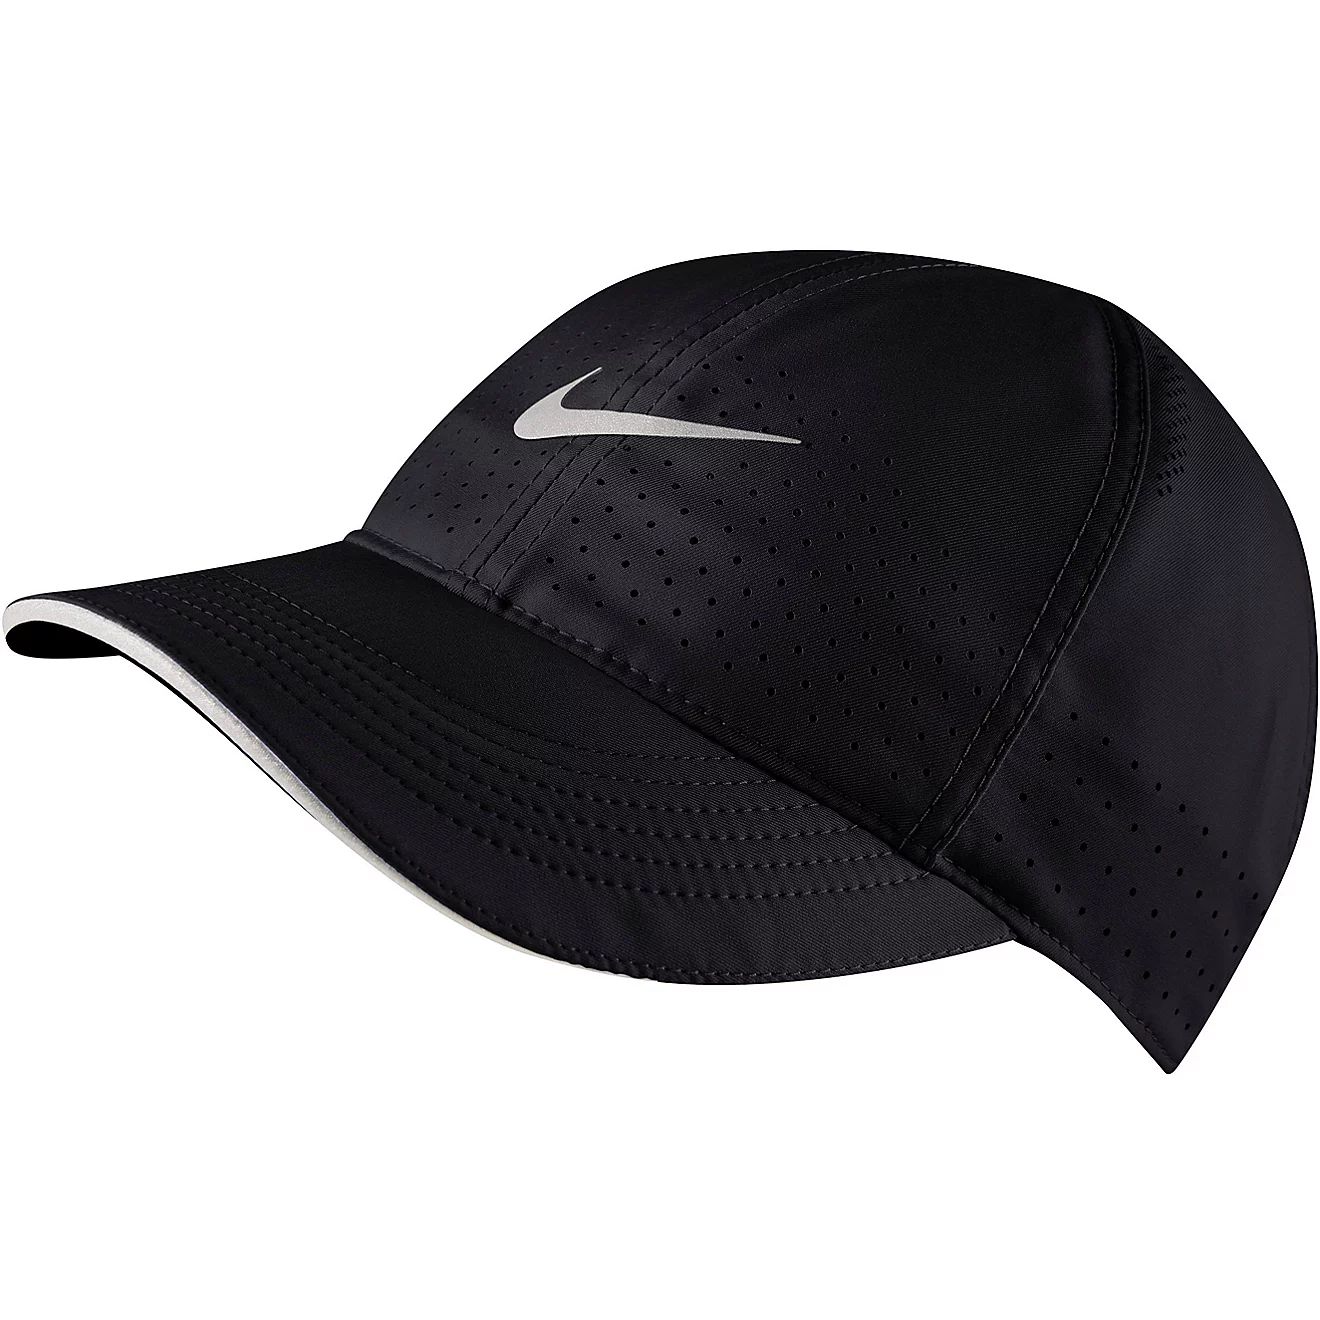 Nike Women's Featherlight Running Cap | Free Shipping at Academy | Academy Sports + Outdoors